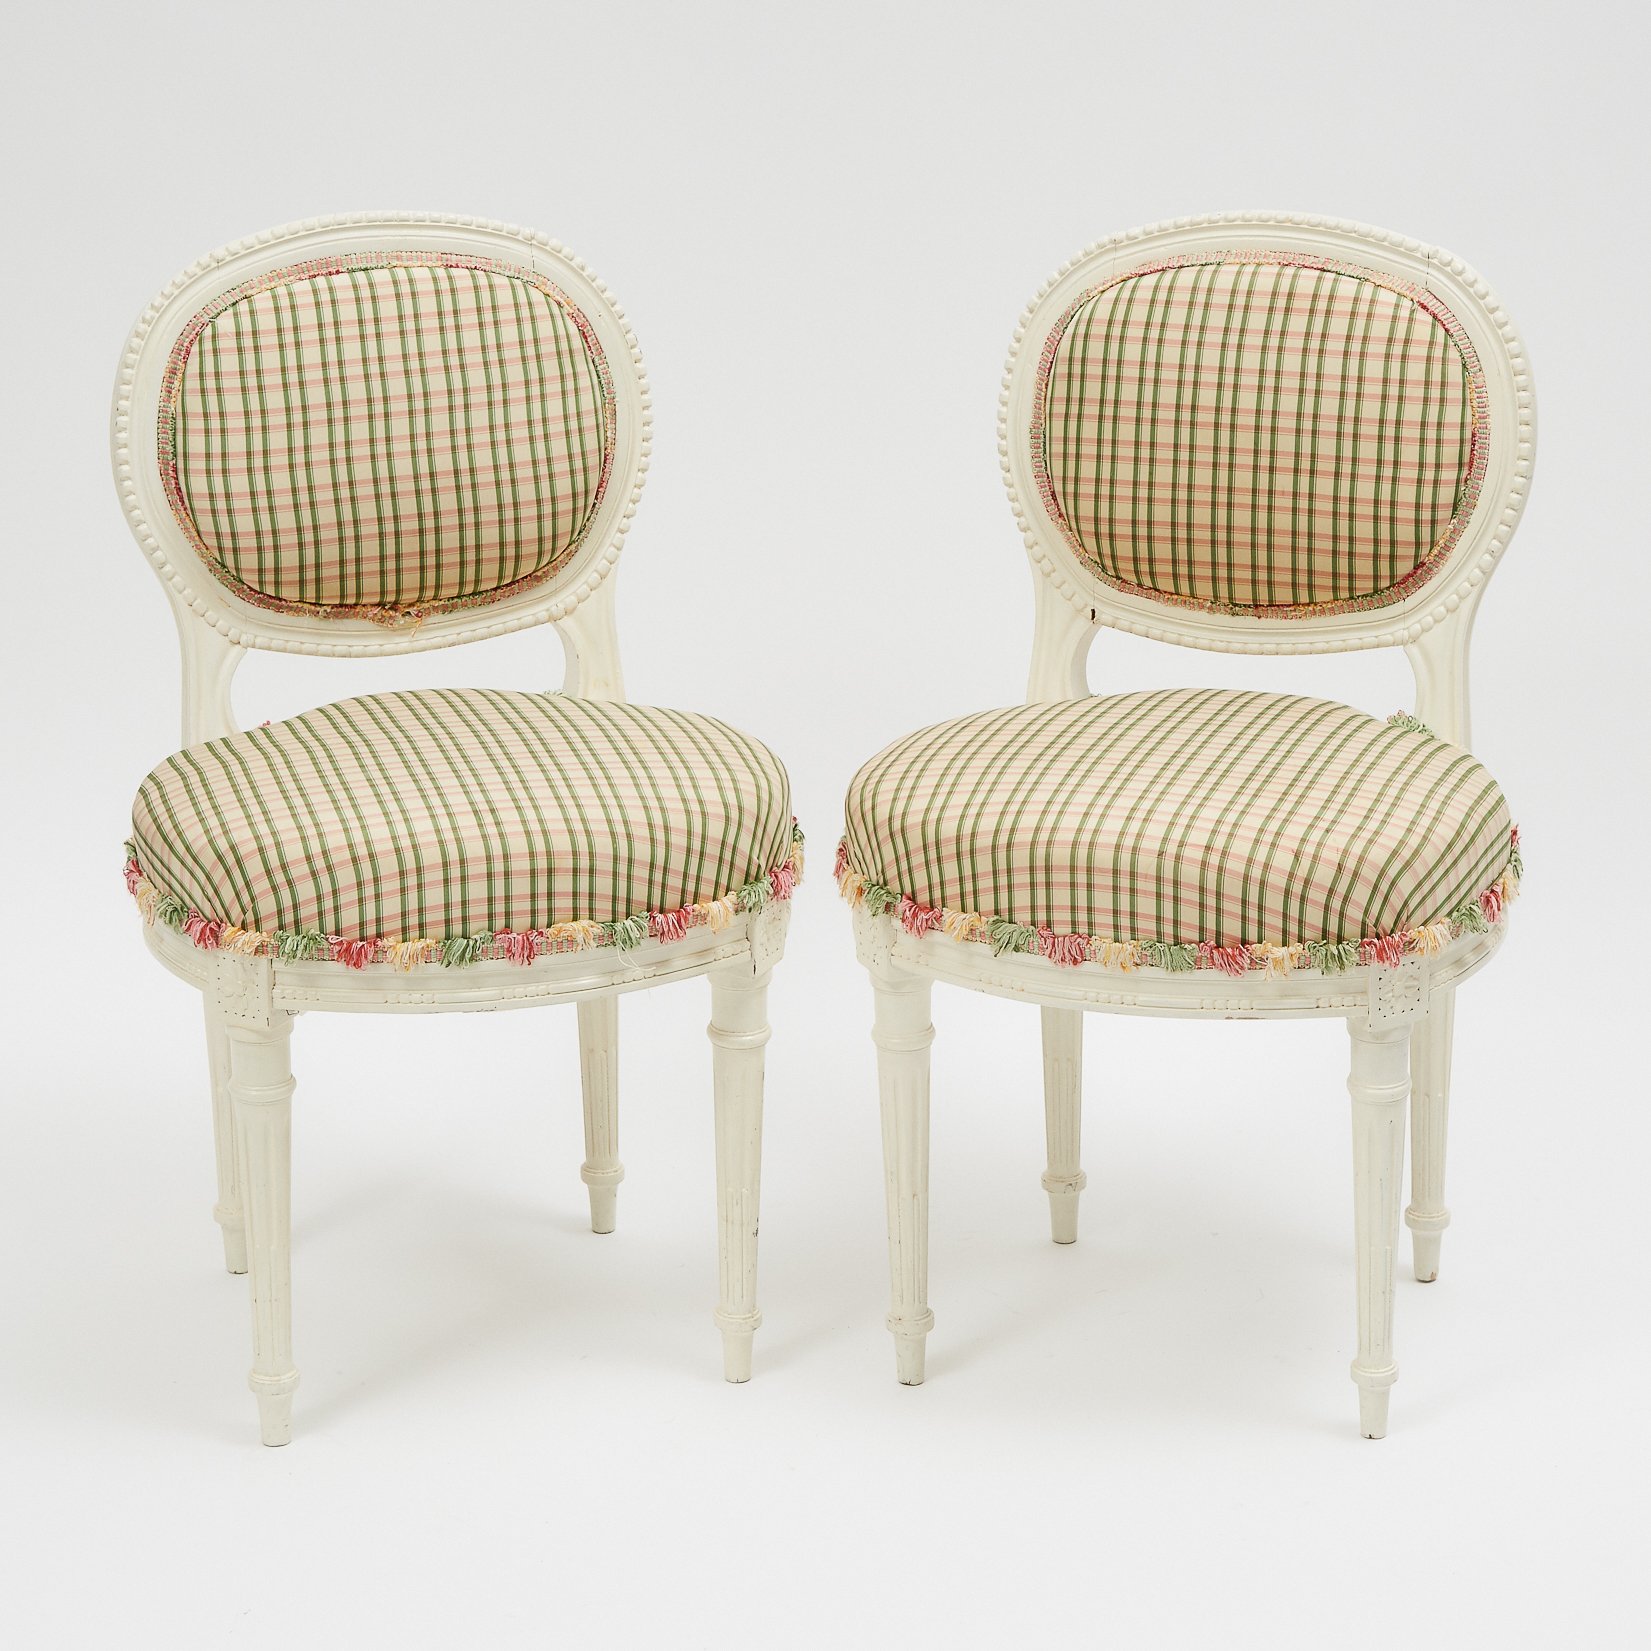 Pair of French Provincial Painted Child's Side Chairs, 20th century